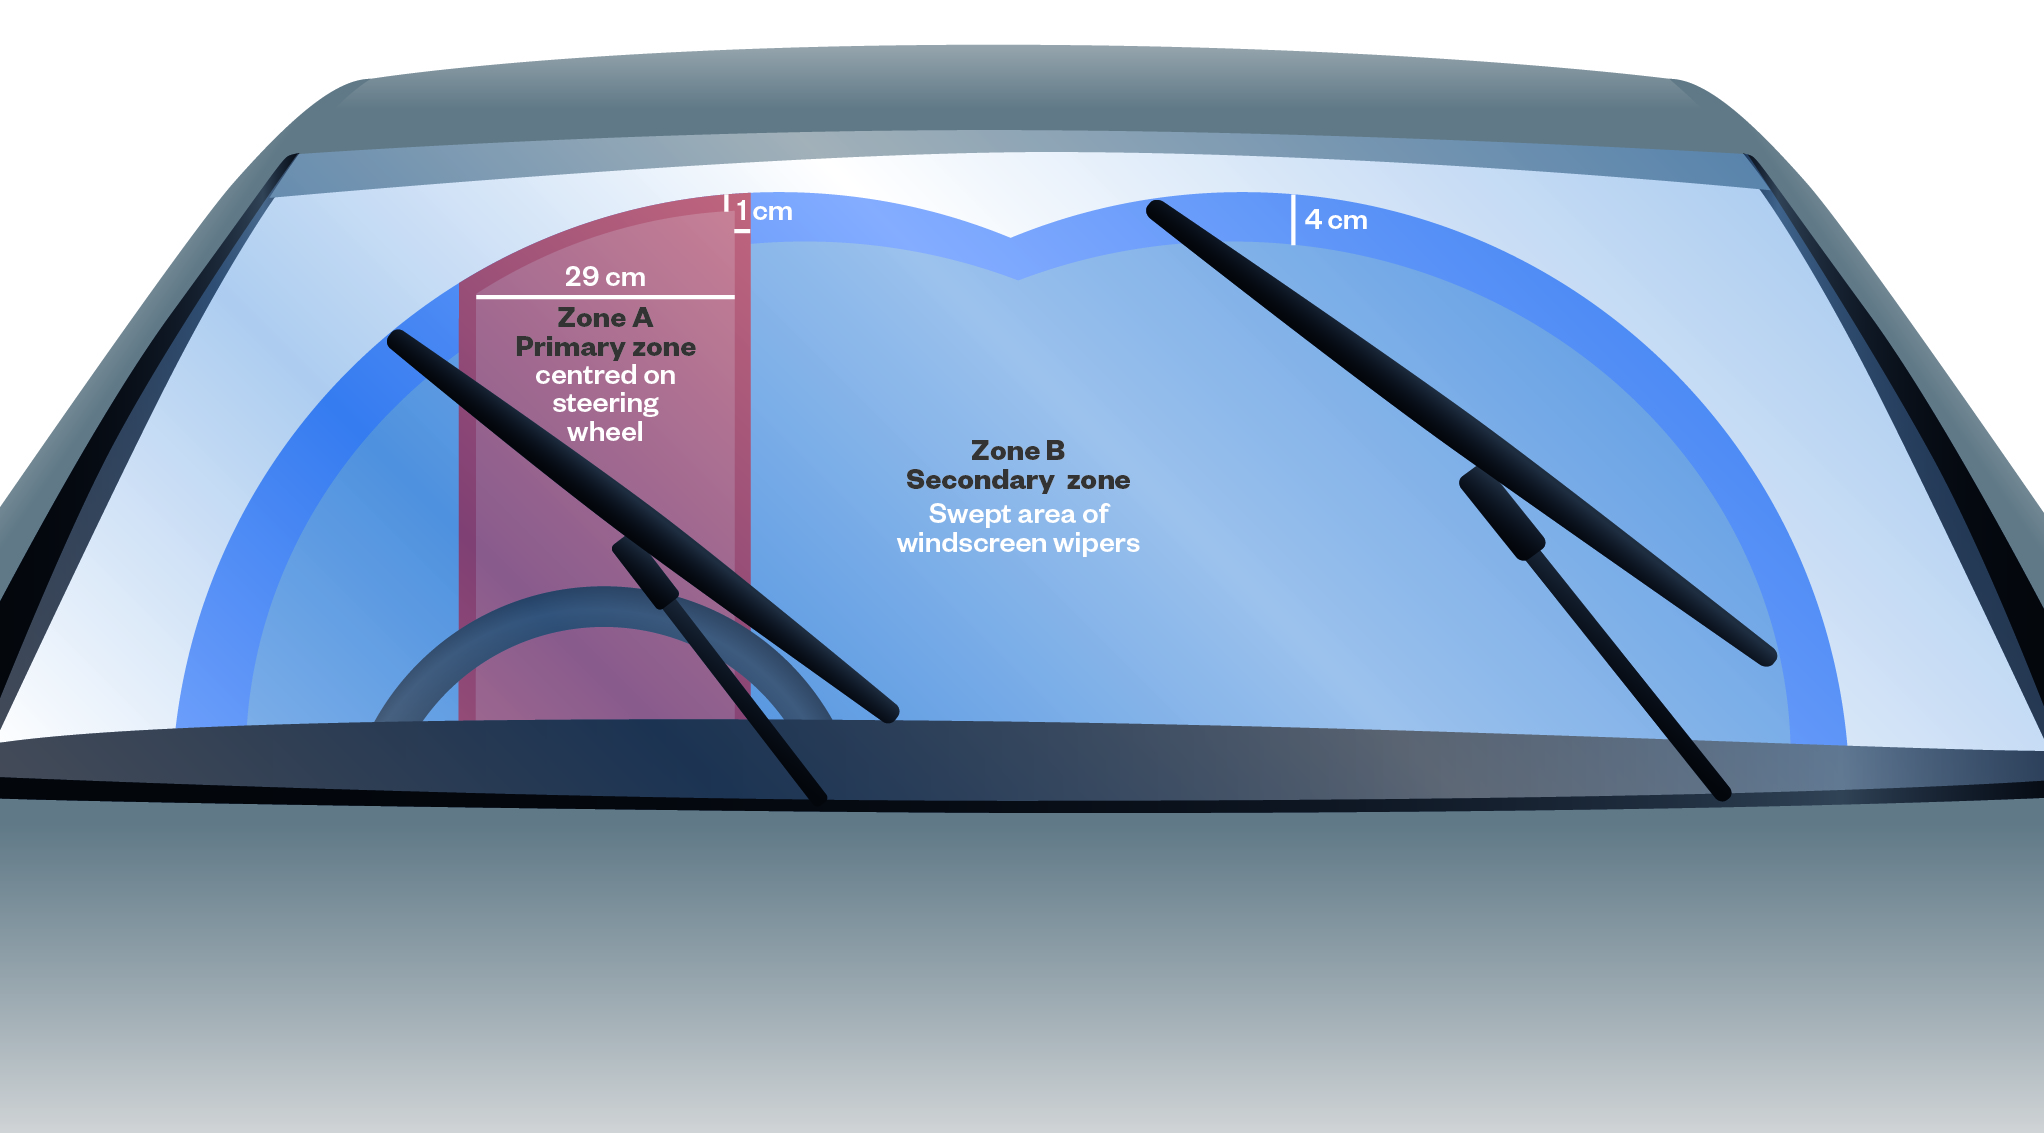 Graphic showing the law on placing phones and sat navs on a windscreen